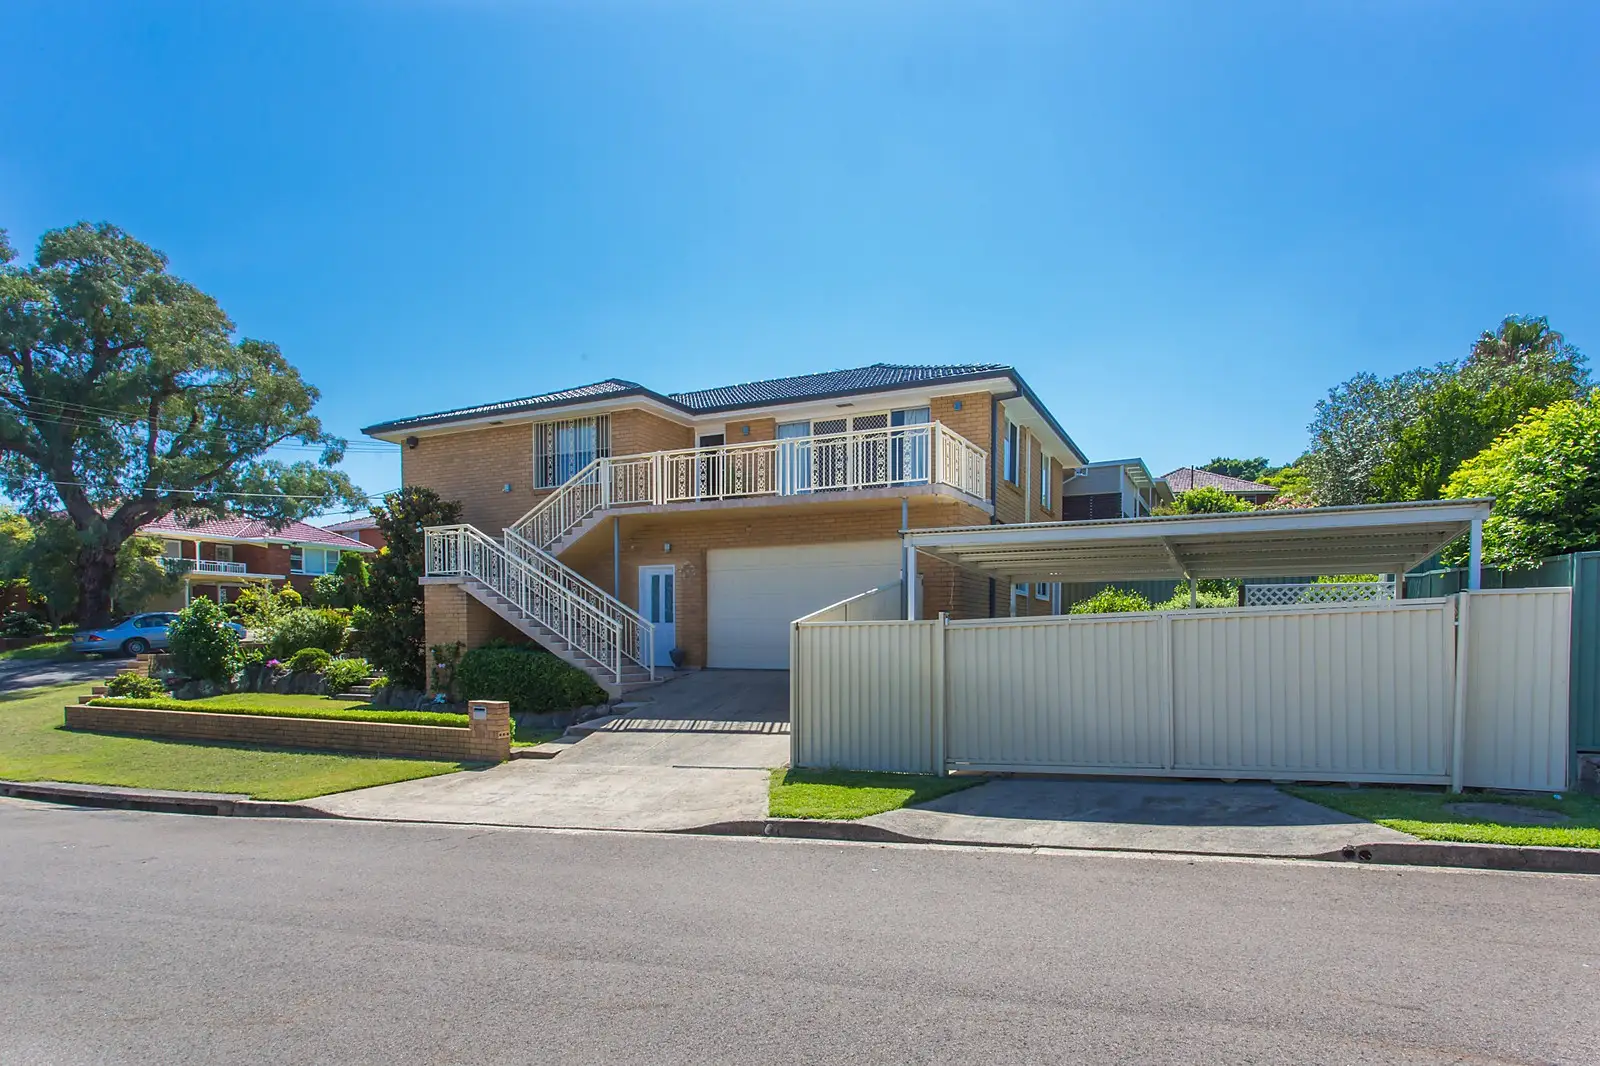 Photo #1: 17 Macleay Place, Earlwood - Sold by Sydney Sotheby's International Realty